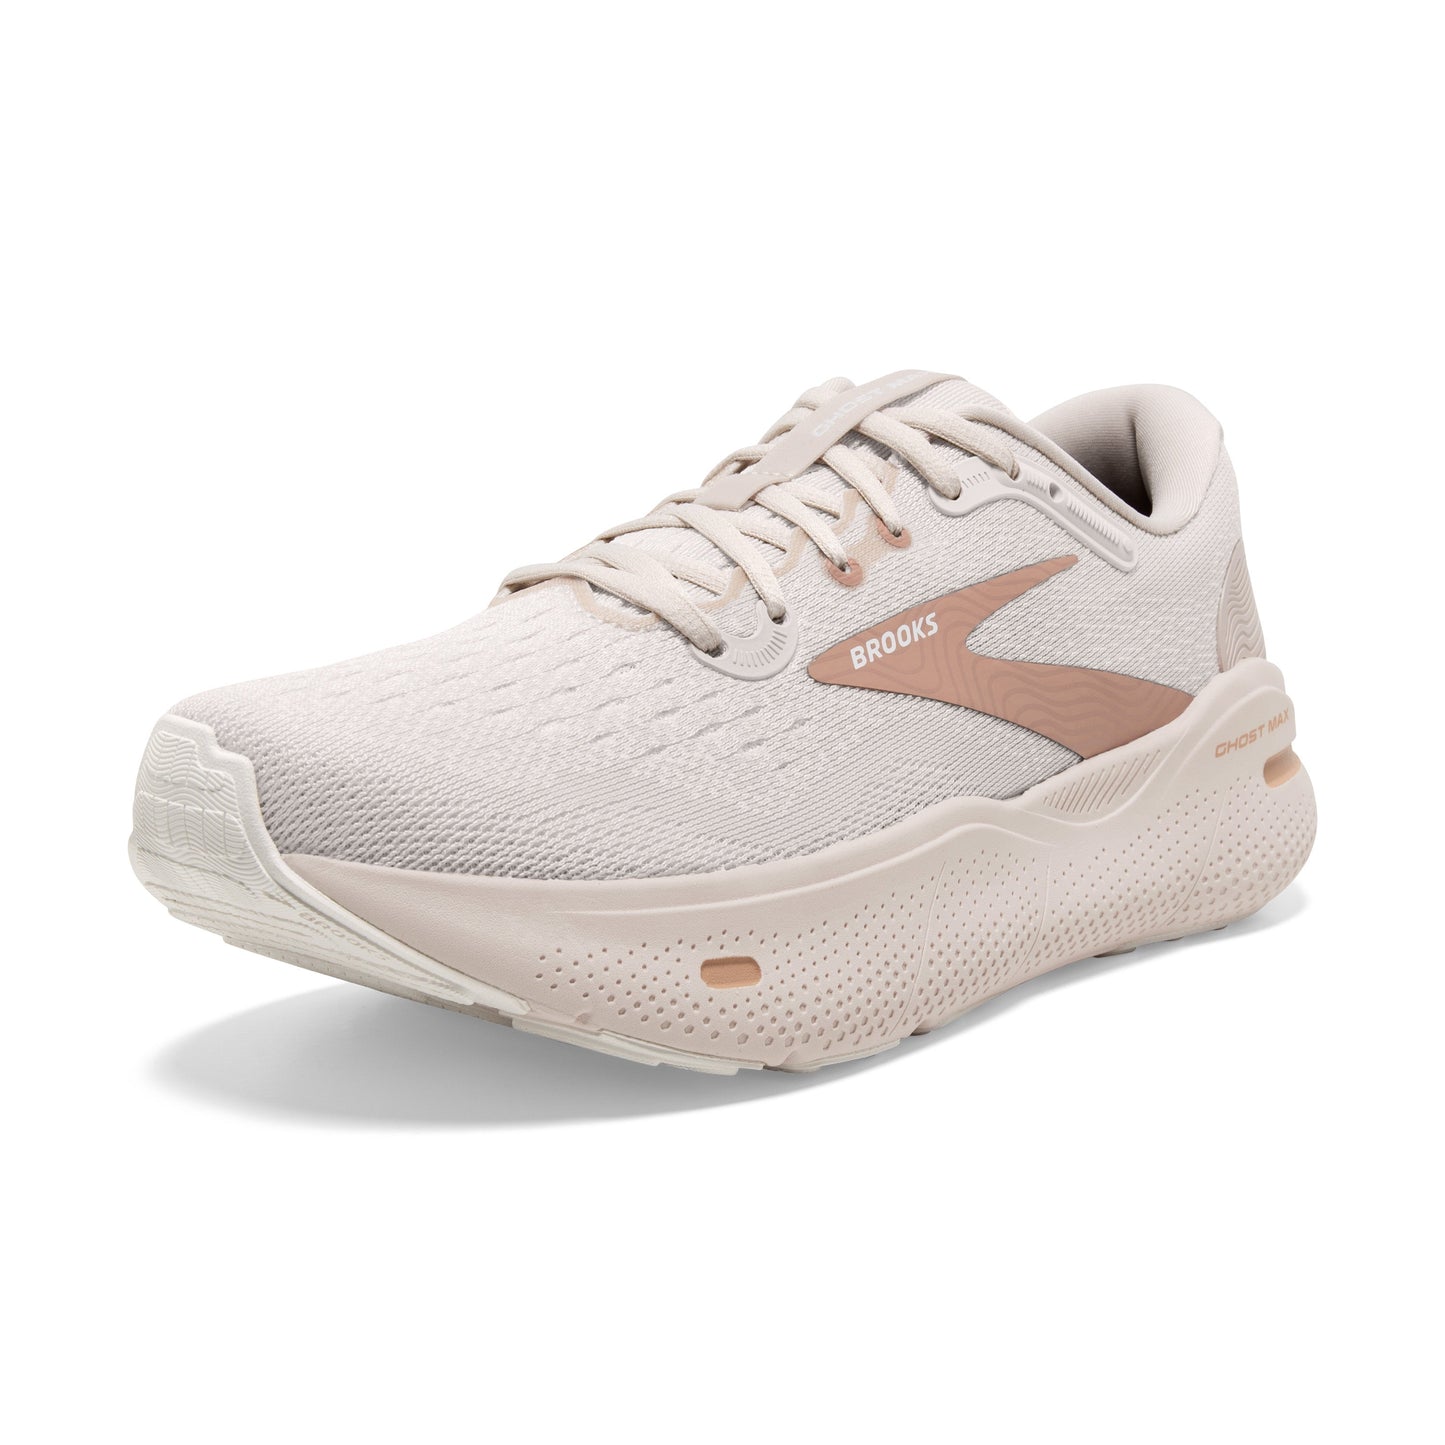 Women's Brooks Ghost Max Crystal Grey/White/Tuscany